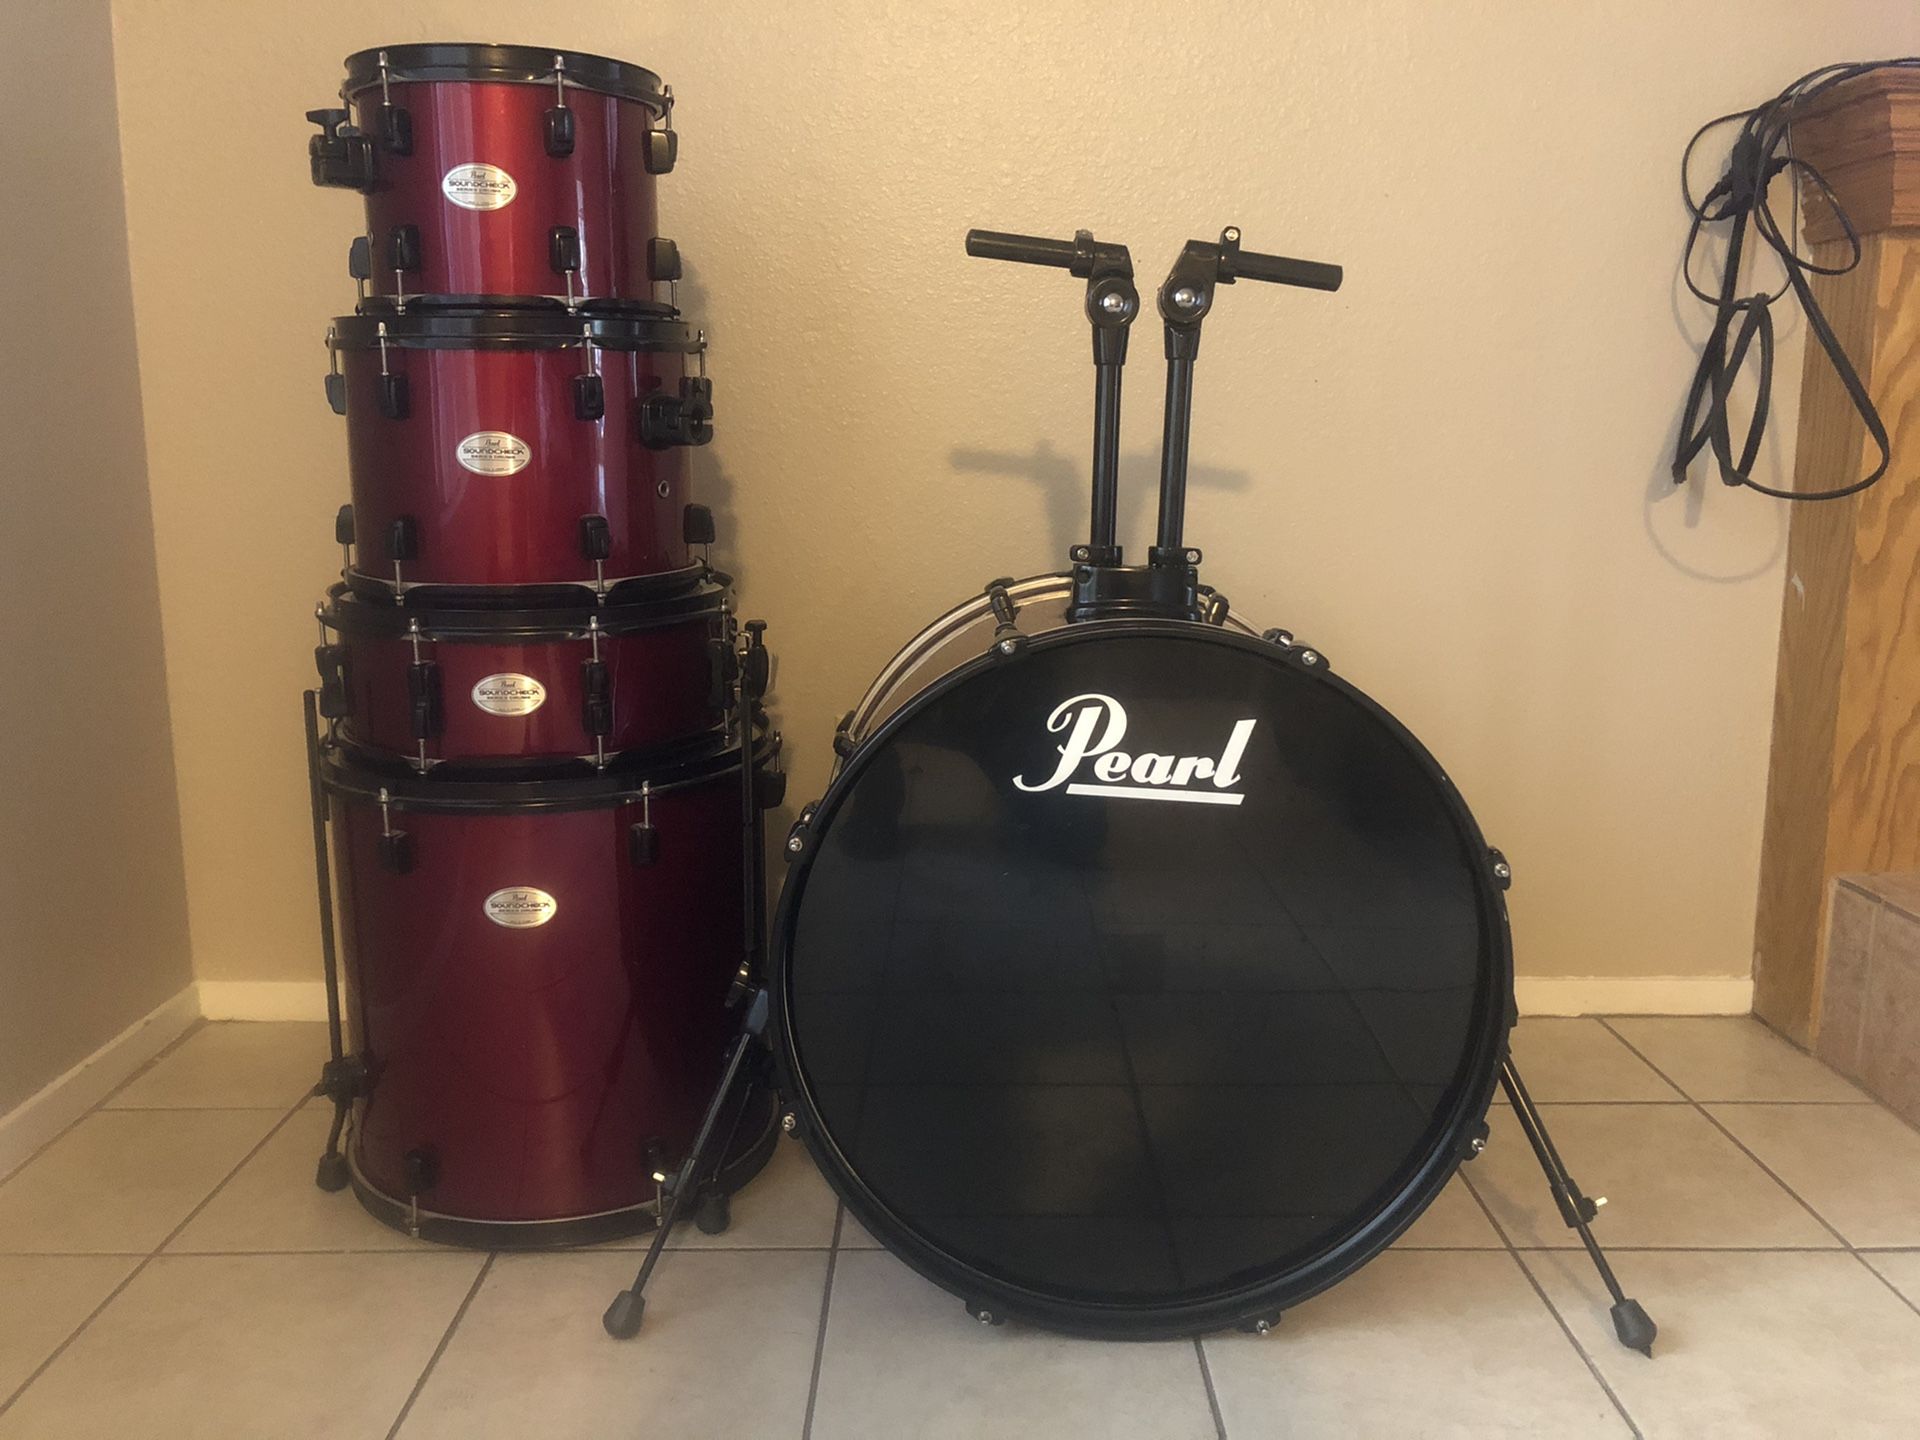 Pearl drum set for sale